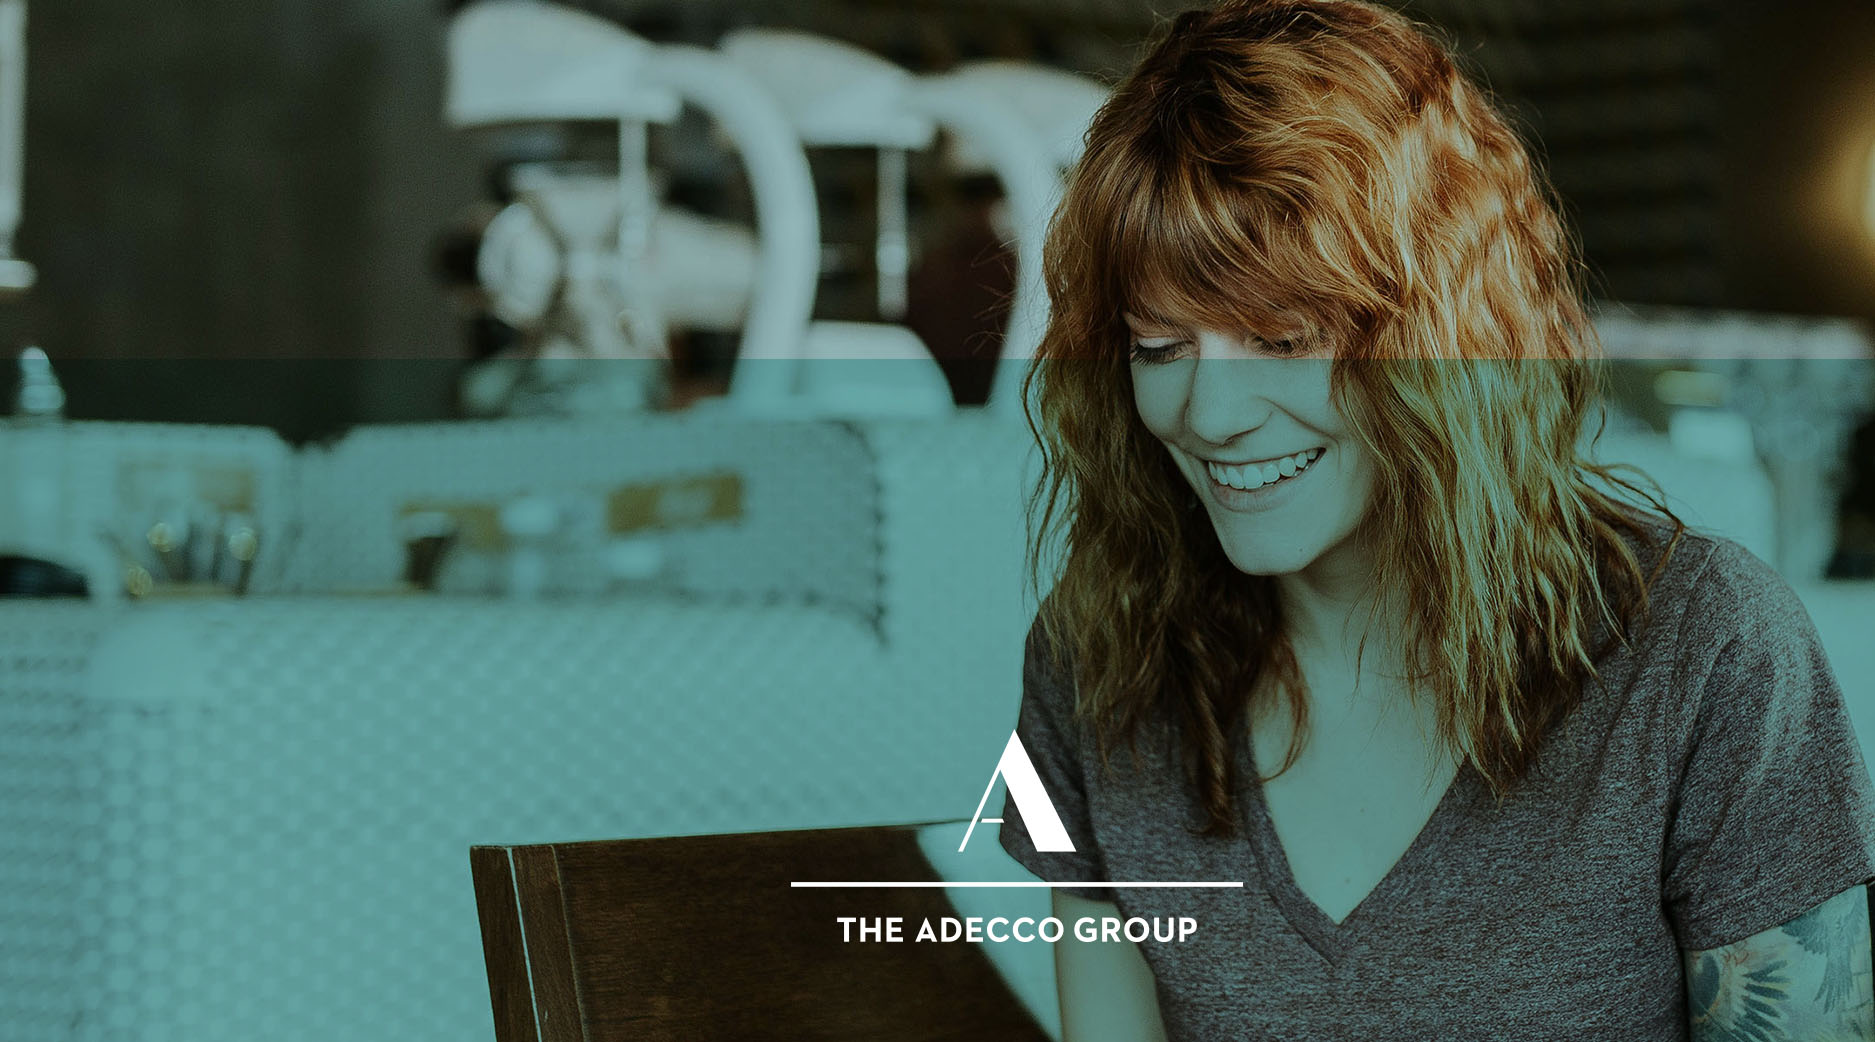 The Adecco Group Image